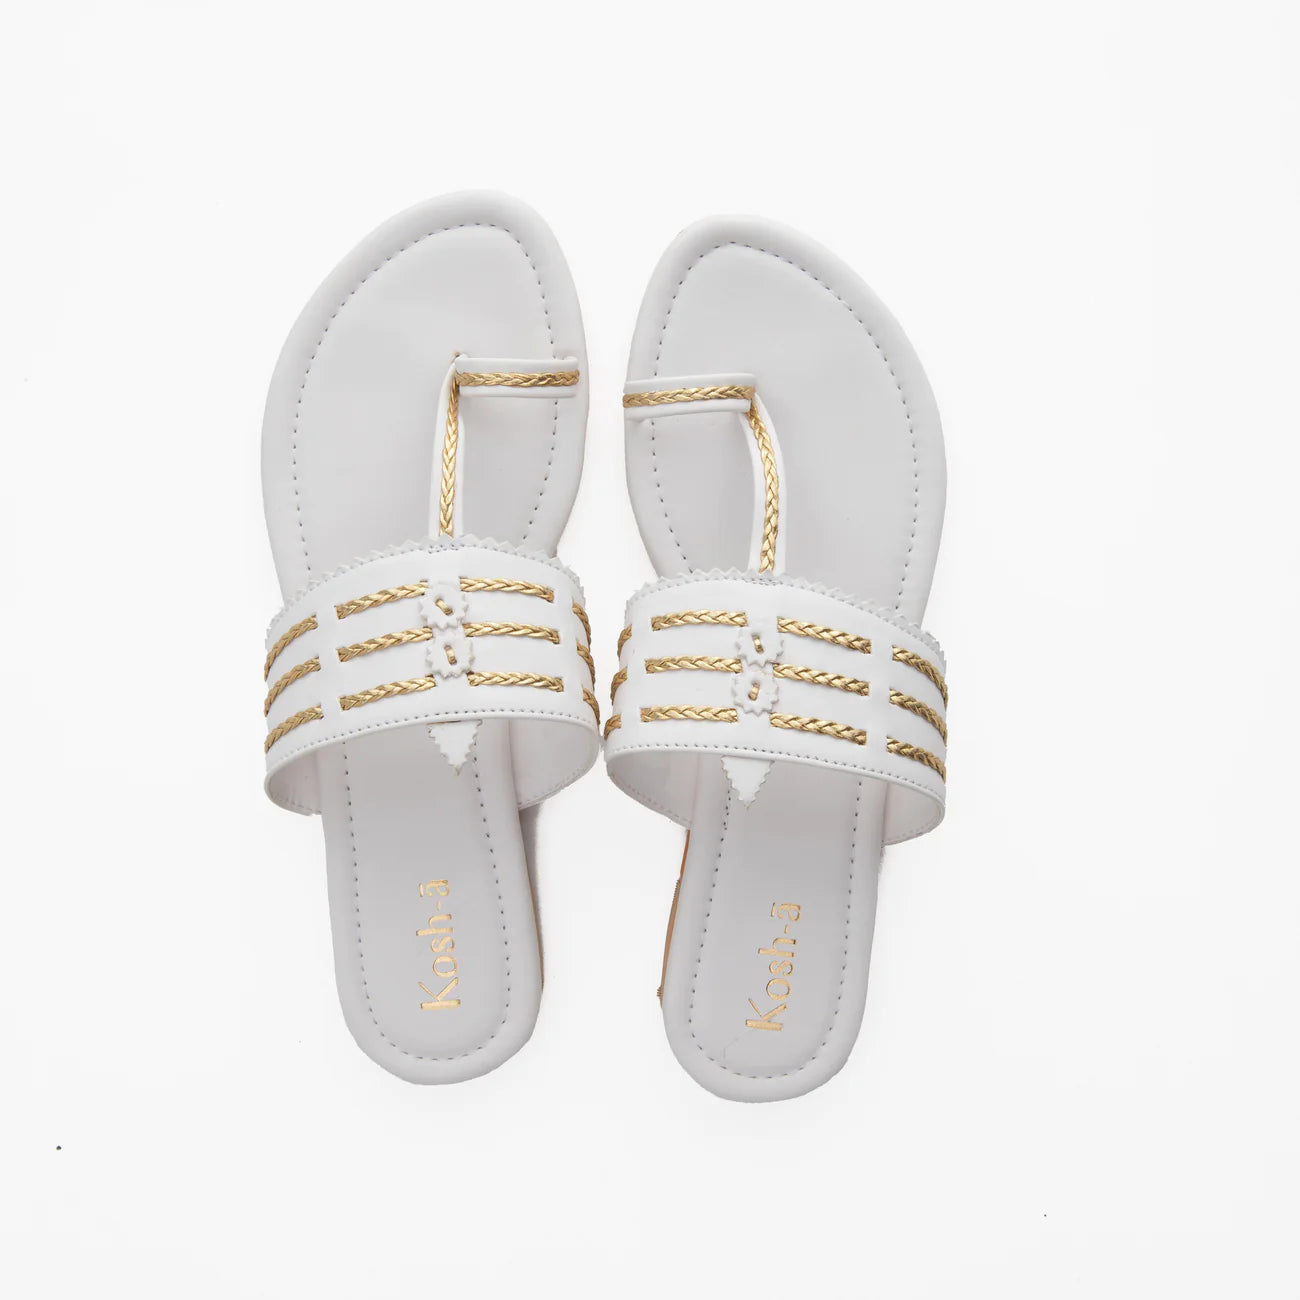 white flat sandals for women with toe ring by kosh-a